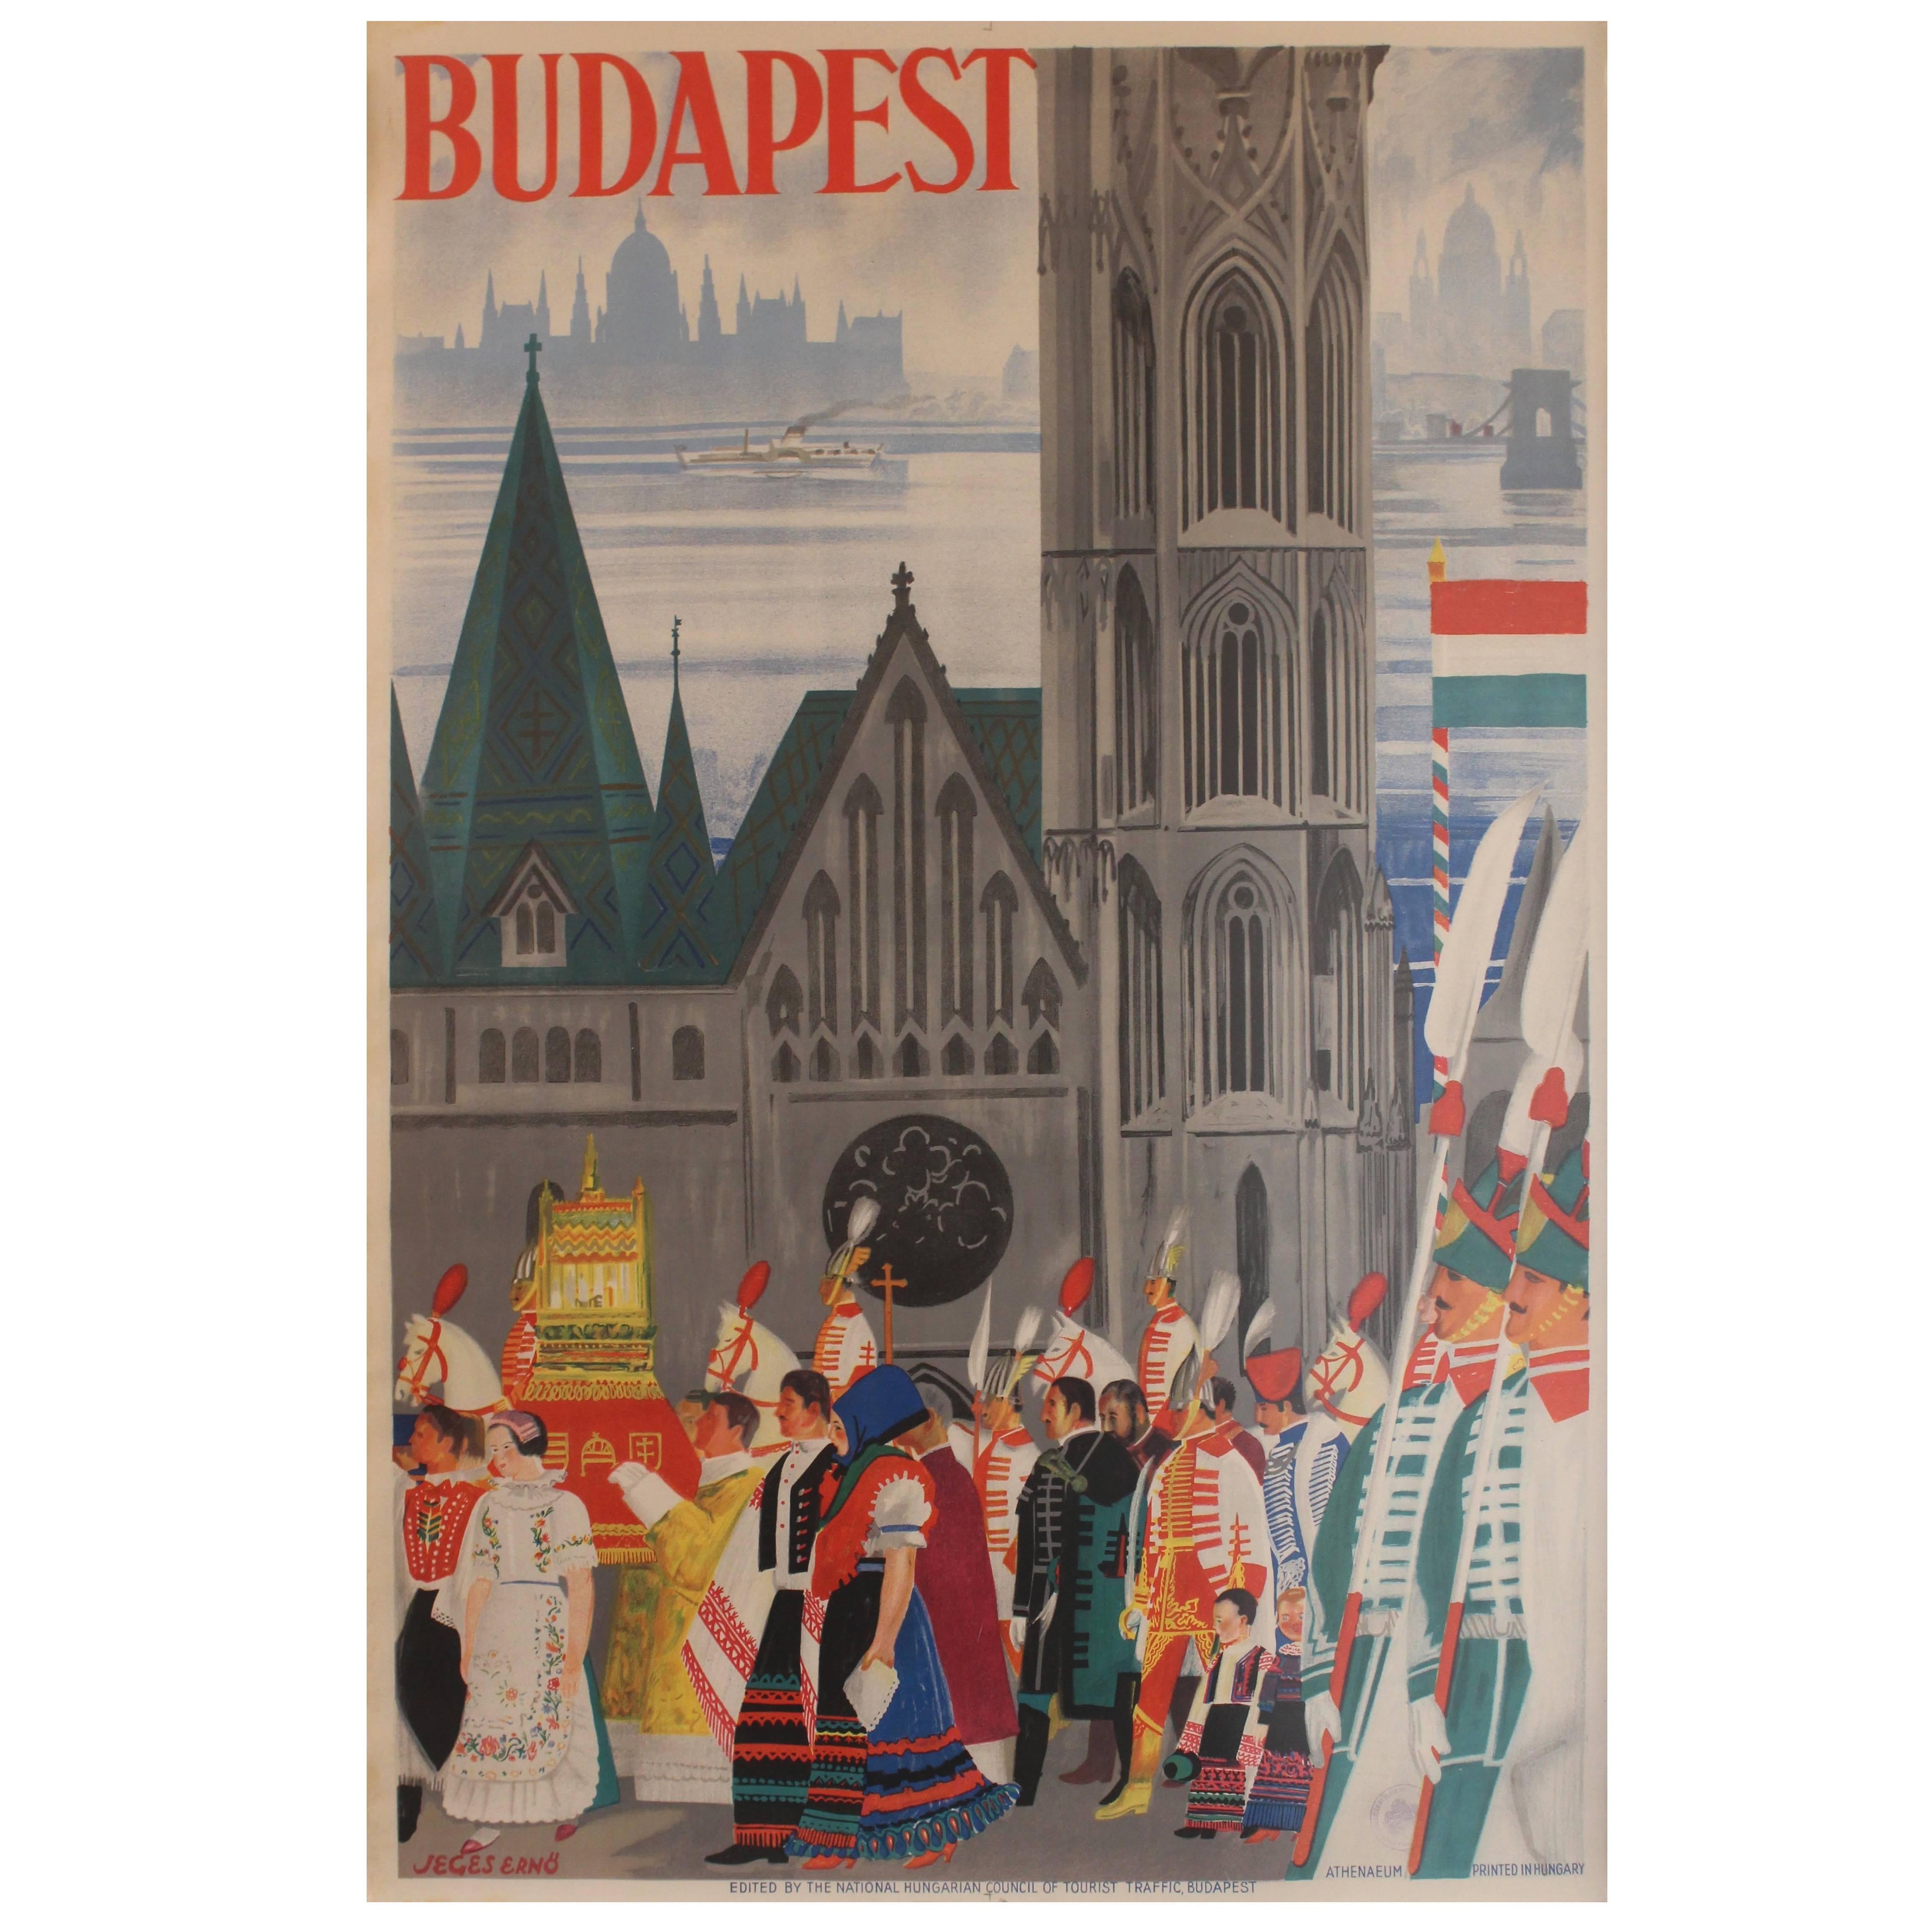 Original 1930s Art Deco Travel Advertising Poster for Budapest by Jeges Erno